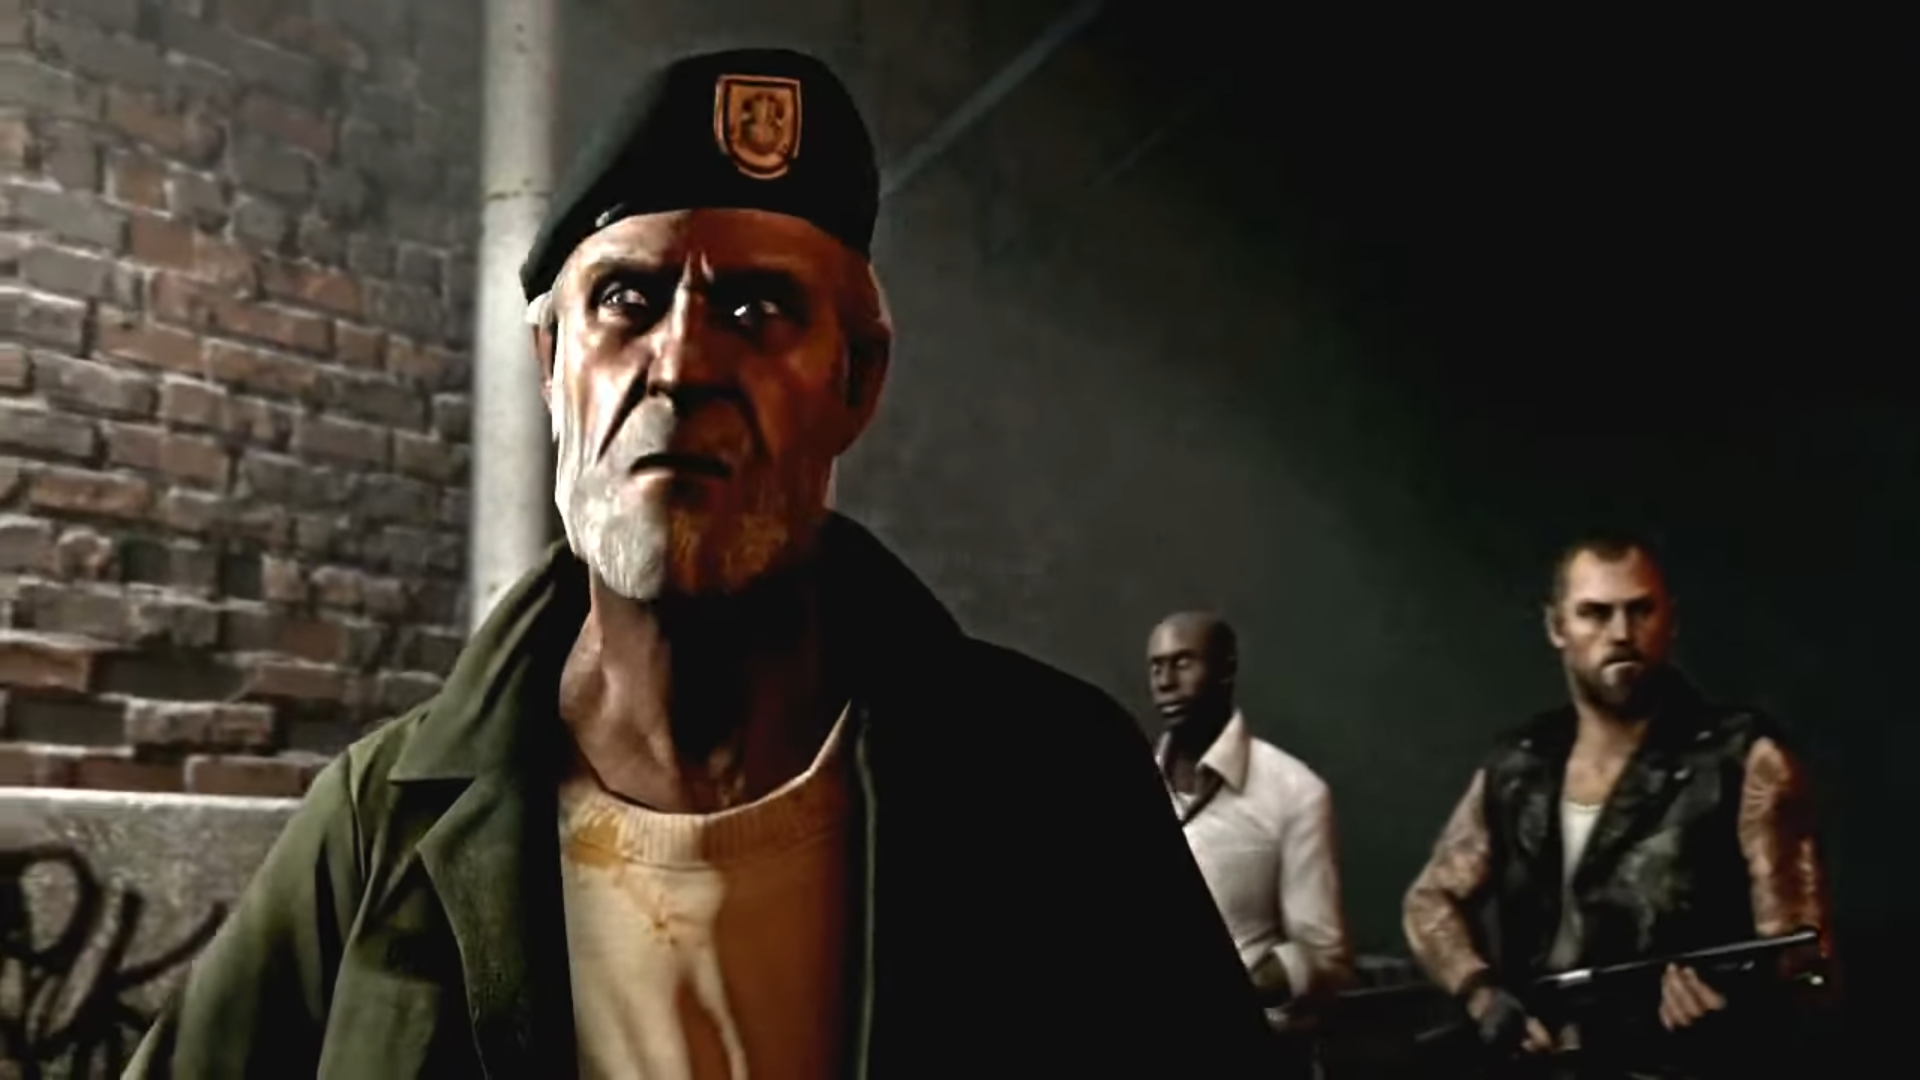 Leaked Information on Left 4 Dead 3 Gives Hope for a New Era of Co-Op Zombie Games - 2